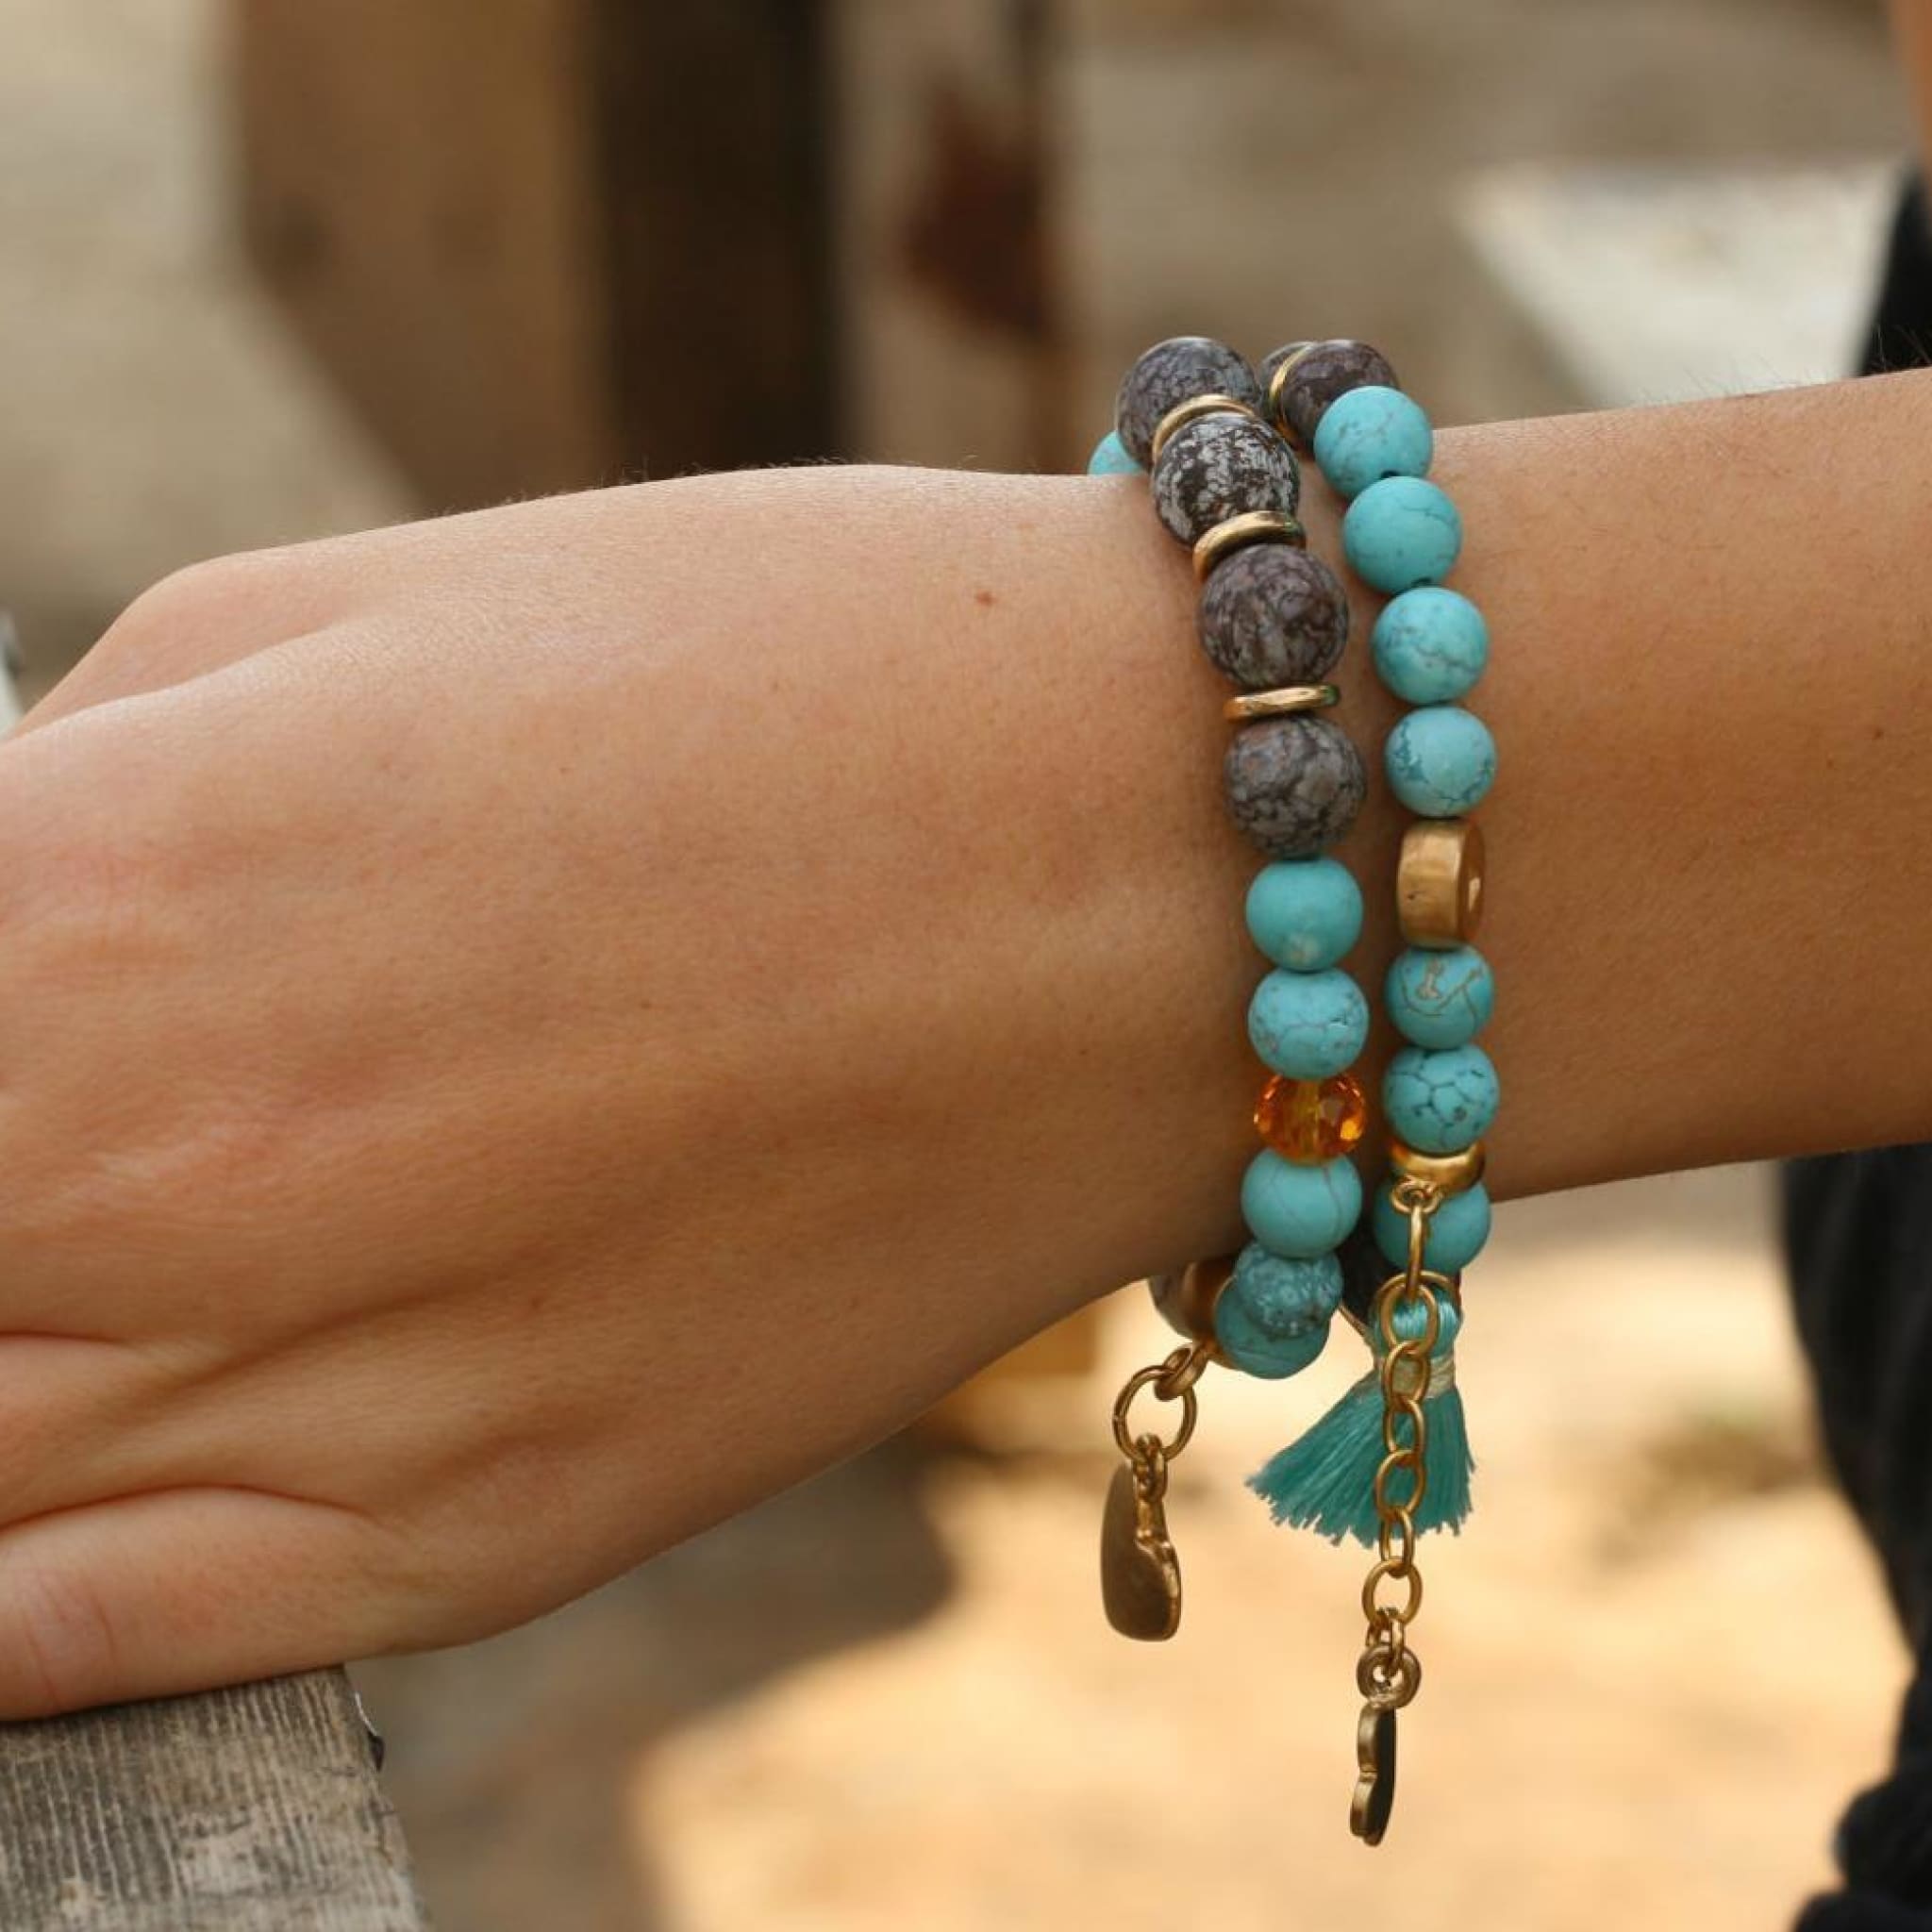 Bead Bracelets for Women with Charm